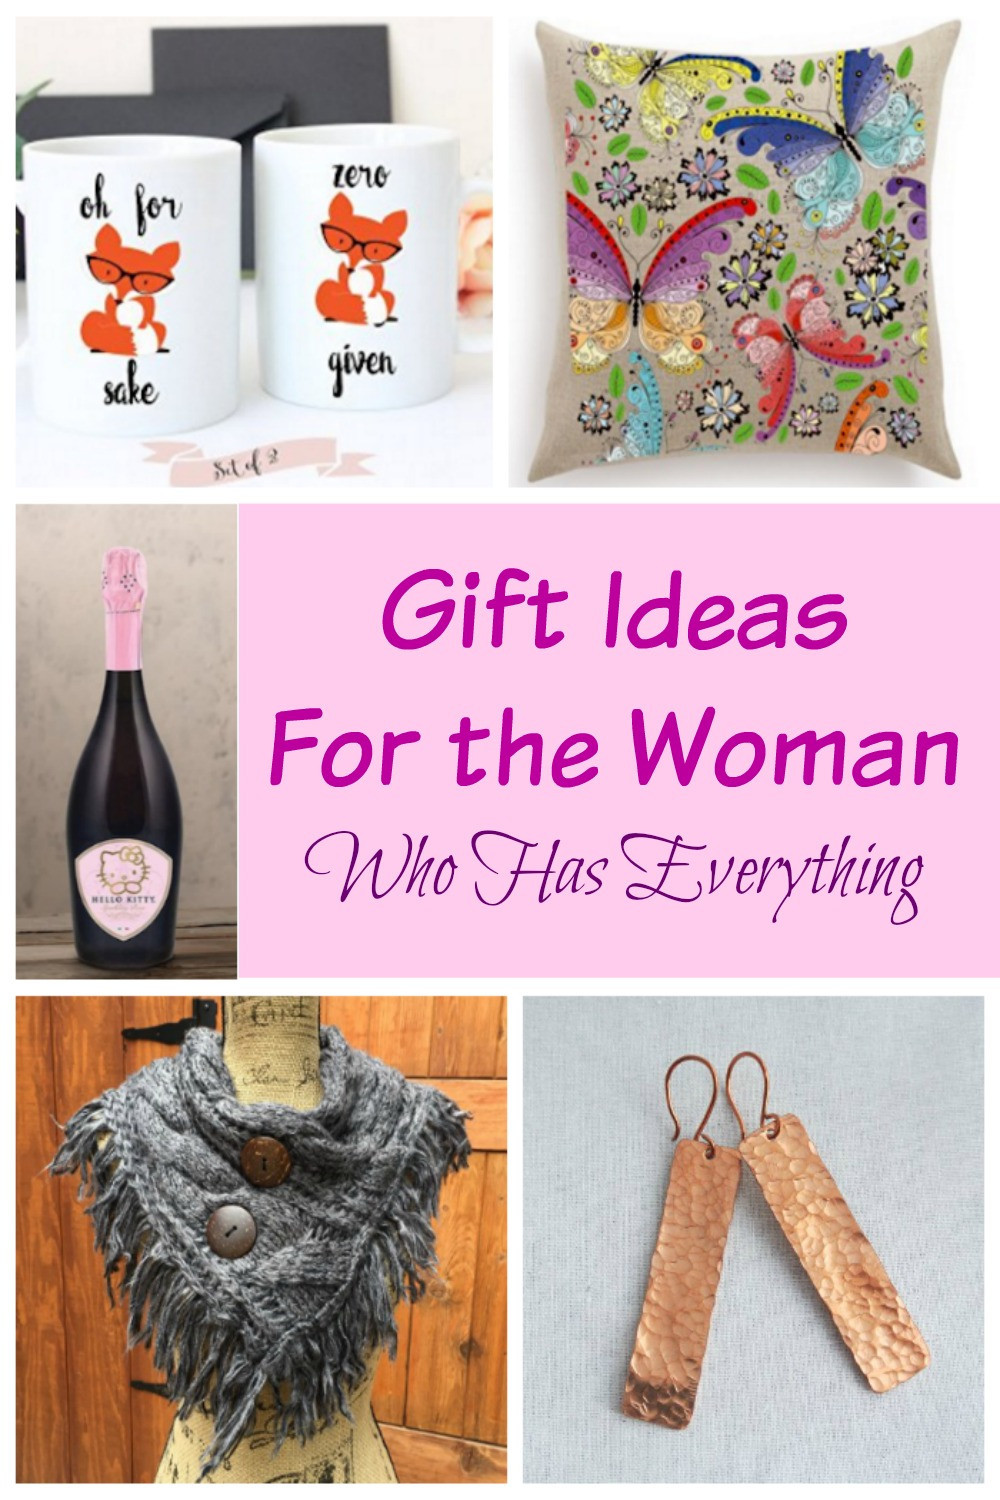 Christmas Gift Ideas For A Couple That Has Everything
 The Best Ideas for Christmas Gift Ideas for A Couple that